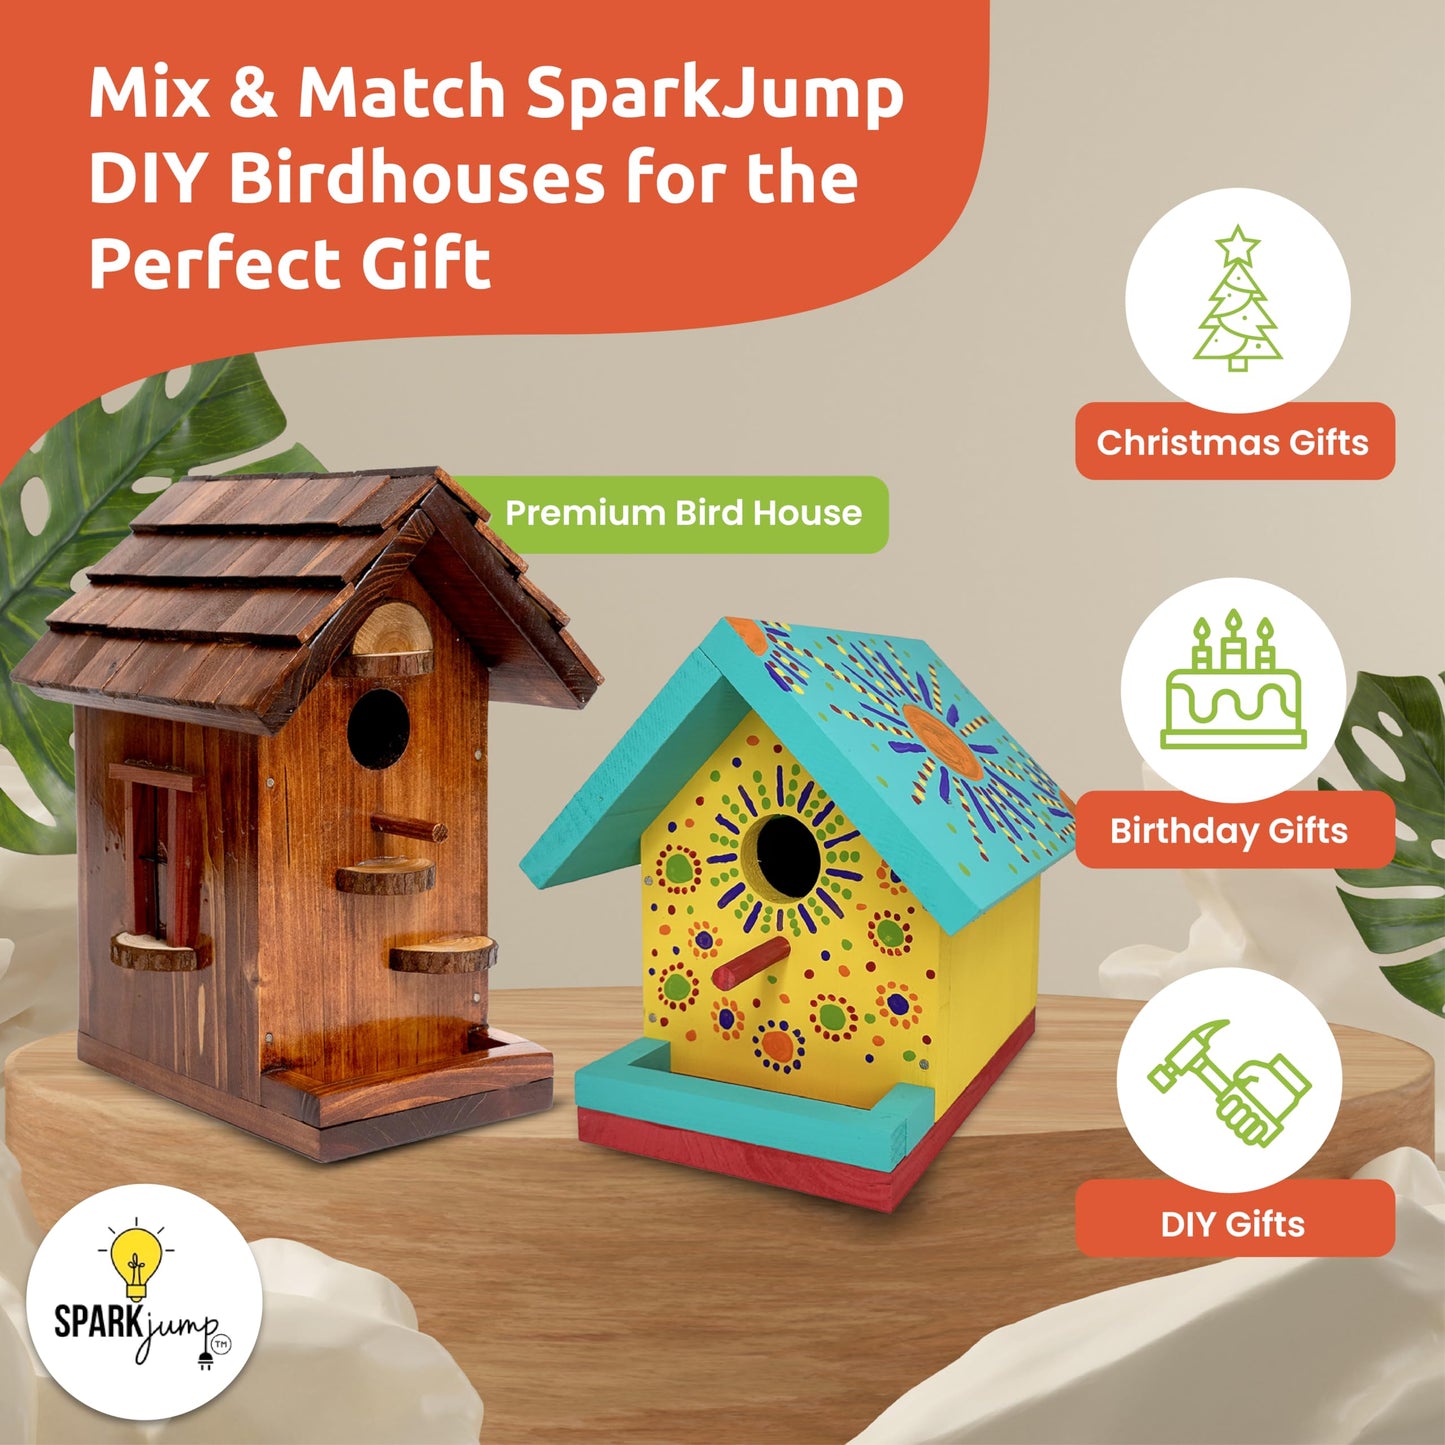 SparkJump Jr Bird House Kit | DIY Birdhouse Kits Made of Cedar Wood for Outdoors | Birdhouse Kits for Kids and Adults with Paint | Bird House Making